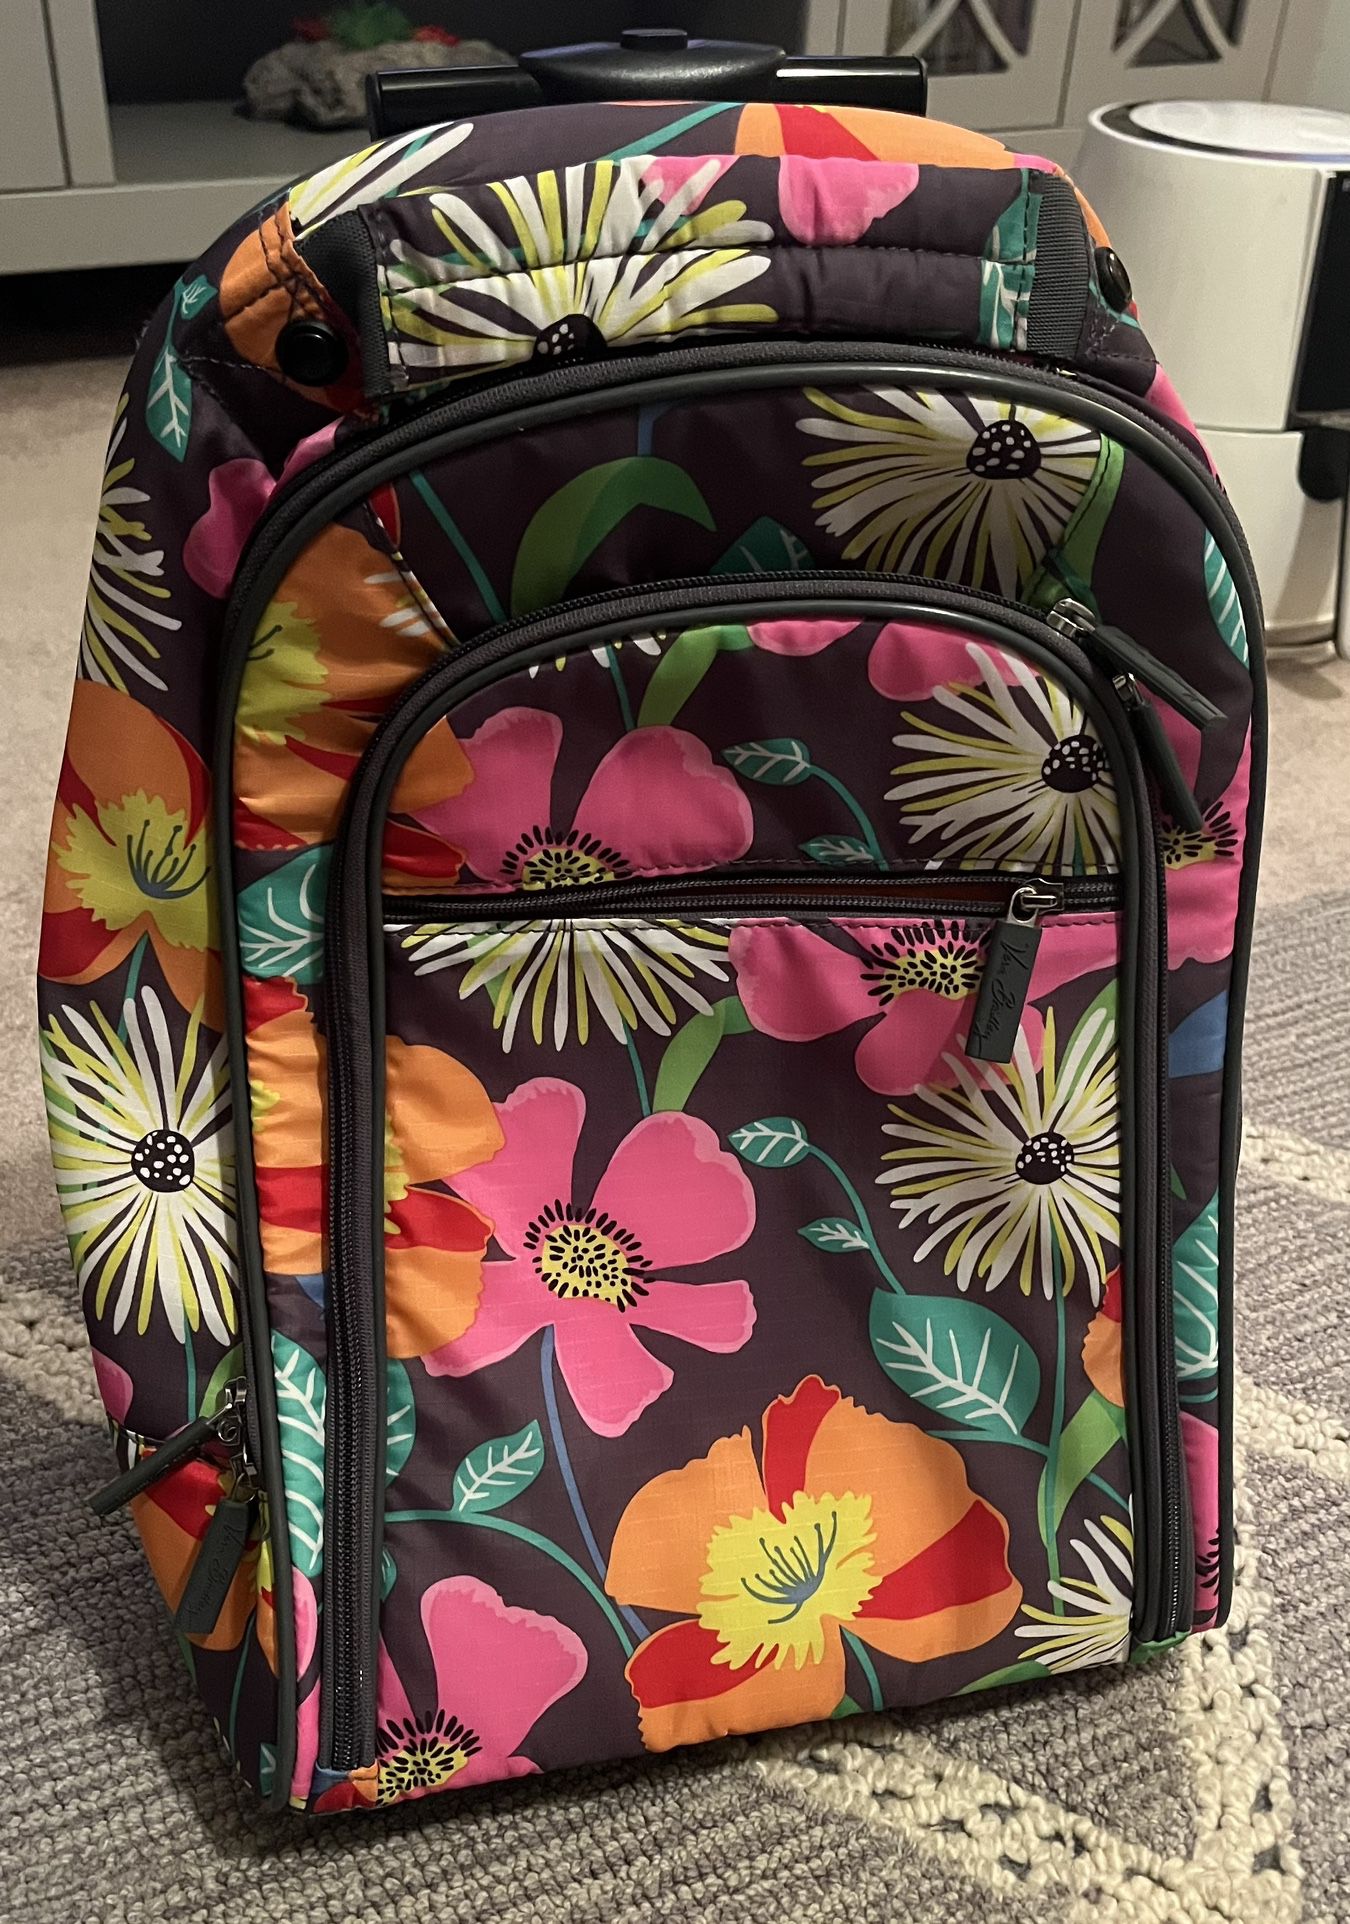 Vera Bradley Rolling Backpack Carryon Suitcase Luggage Jazzy Bloom Mint